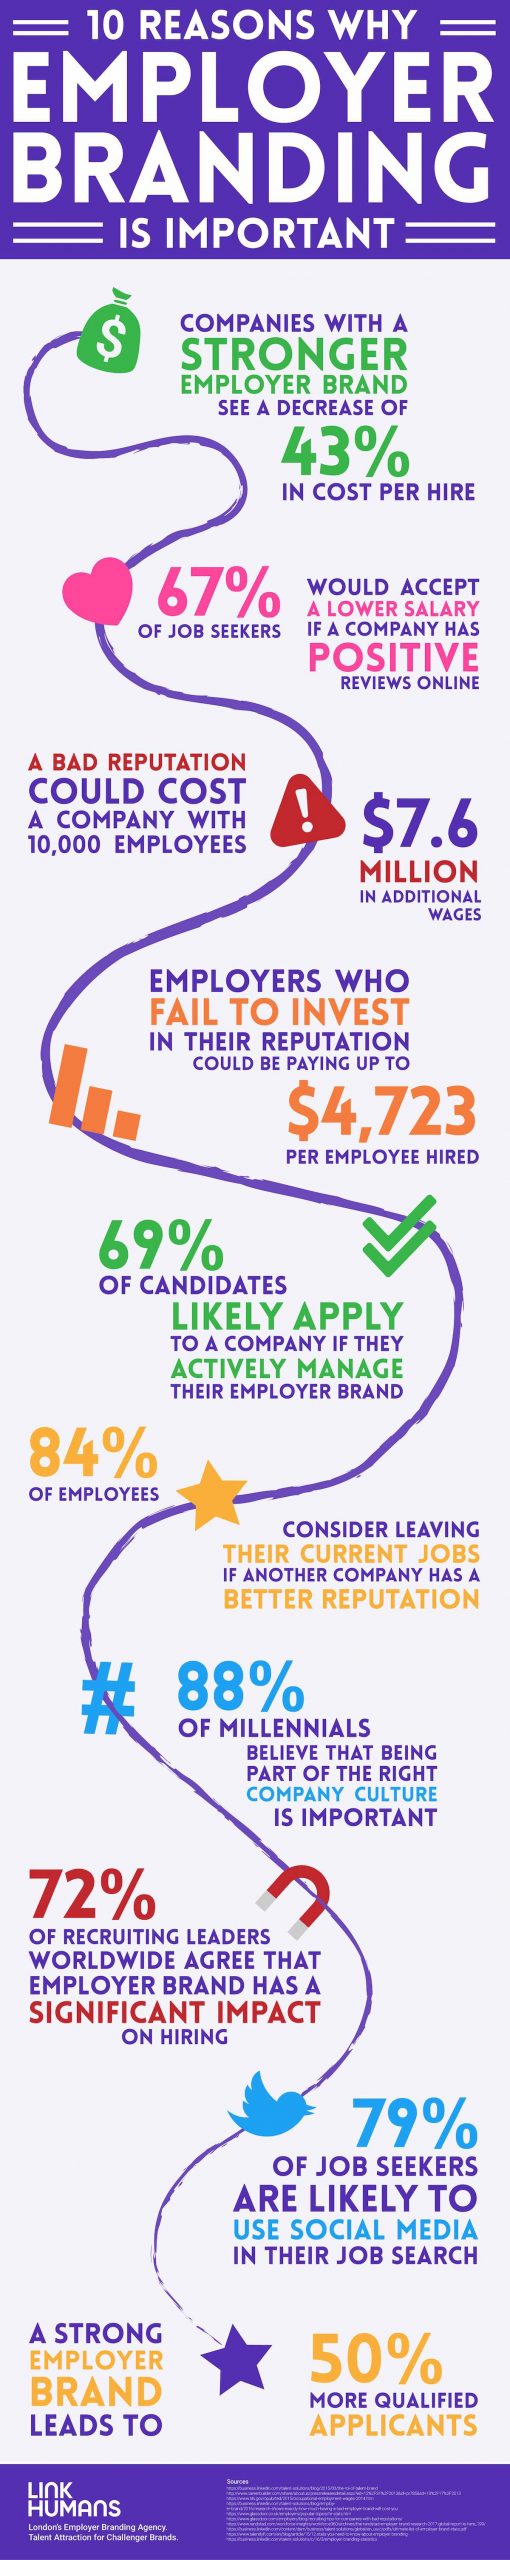 why employer branding is important to HR - infographic